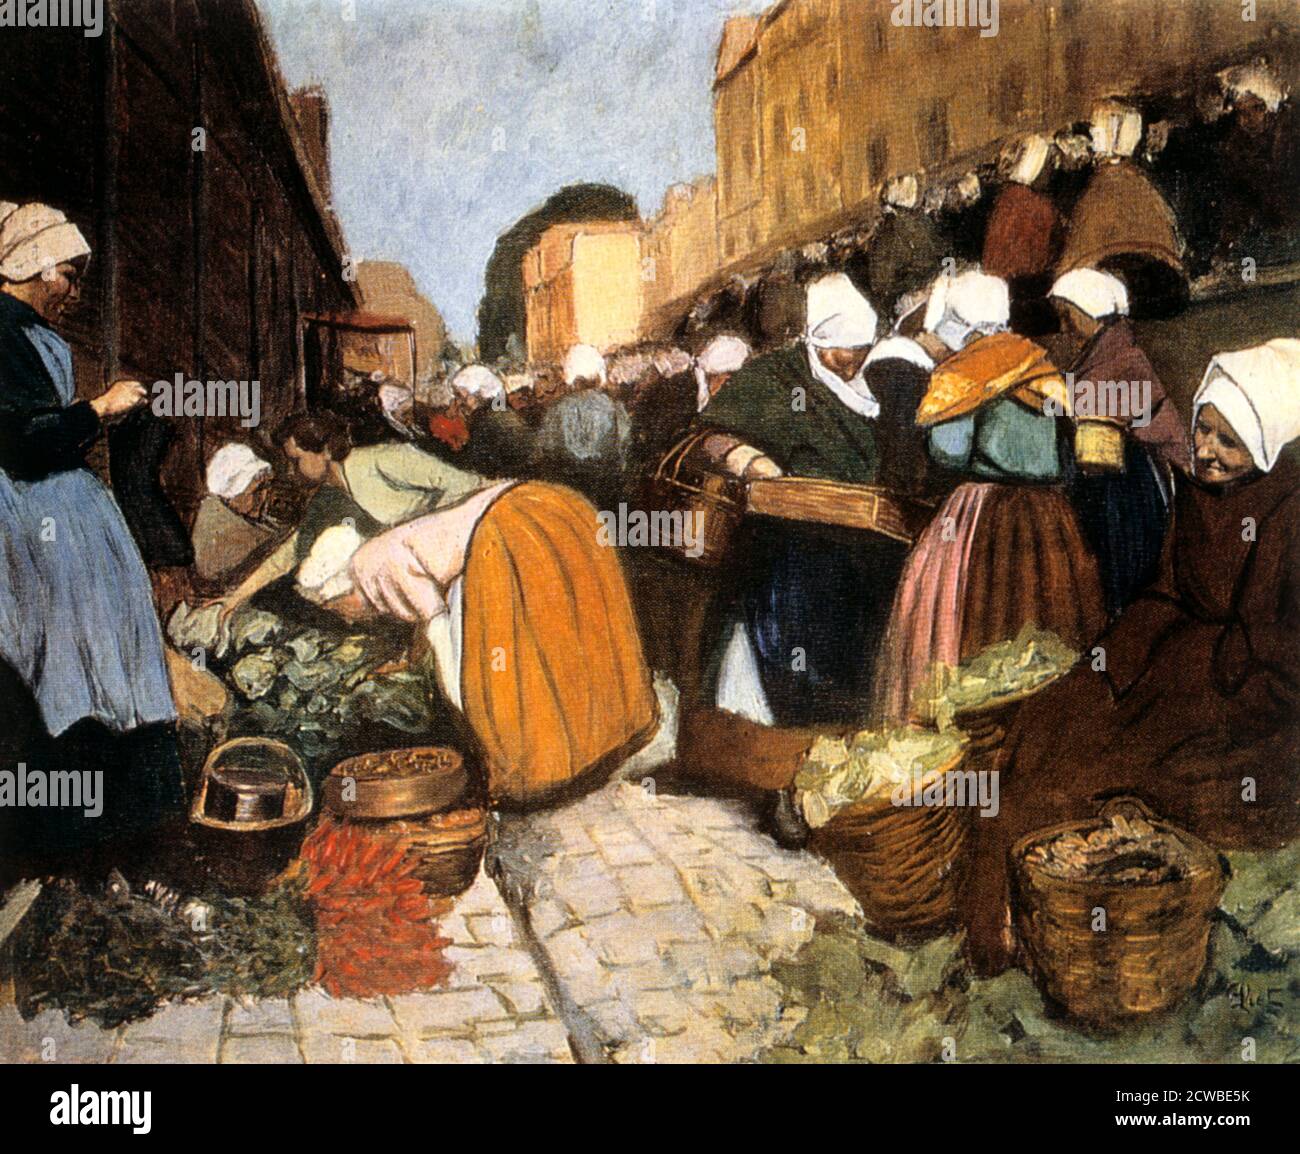 Market in Brest', 1899. Artist: Fernand Piet. Fernand Piet(1869-1942) was a pupil of Eugene Carriere , Fernand Cormon and Alfred Roll . He exhibited to the Independents and French Artists his paintings and his engravings of landscapes of Brittany and Holland. Stock Photo